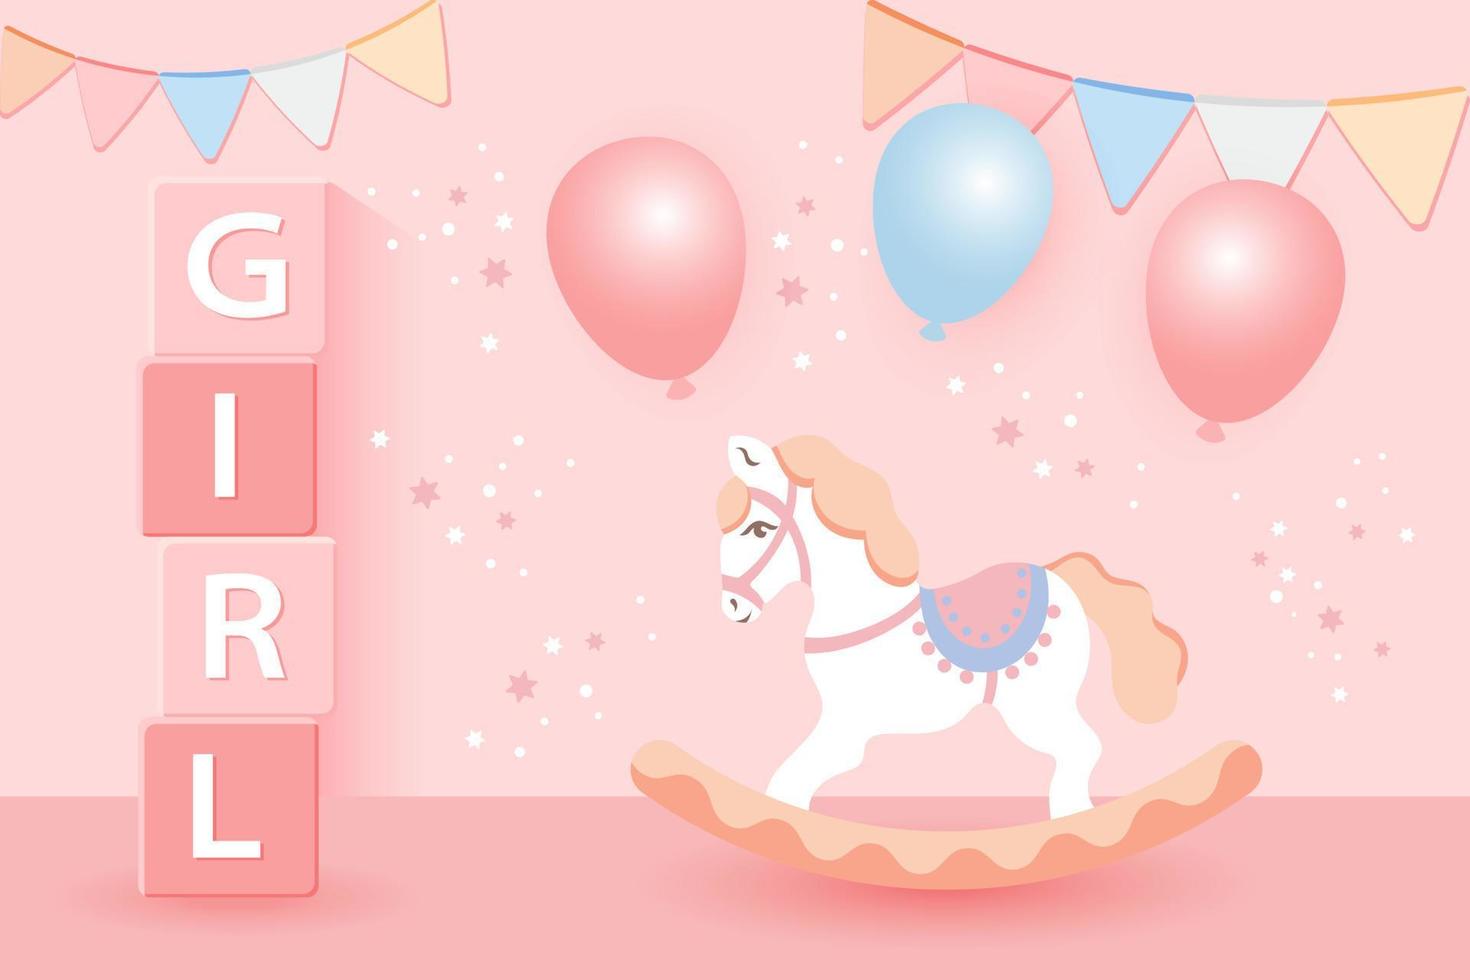 3D baby shower for girls. Children's toys, rocking horse and balloons in pastel colors on a starry background. Game room background, vector